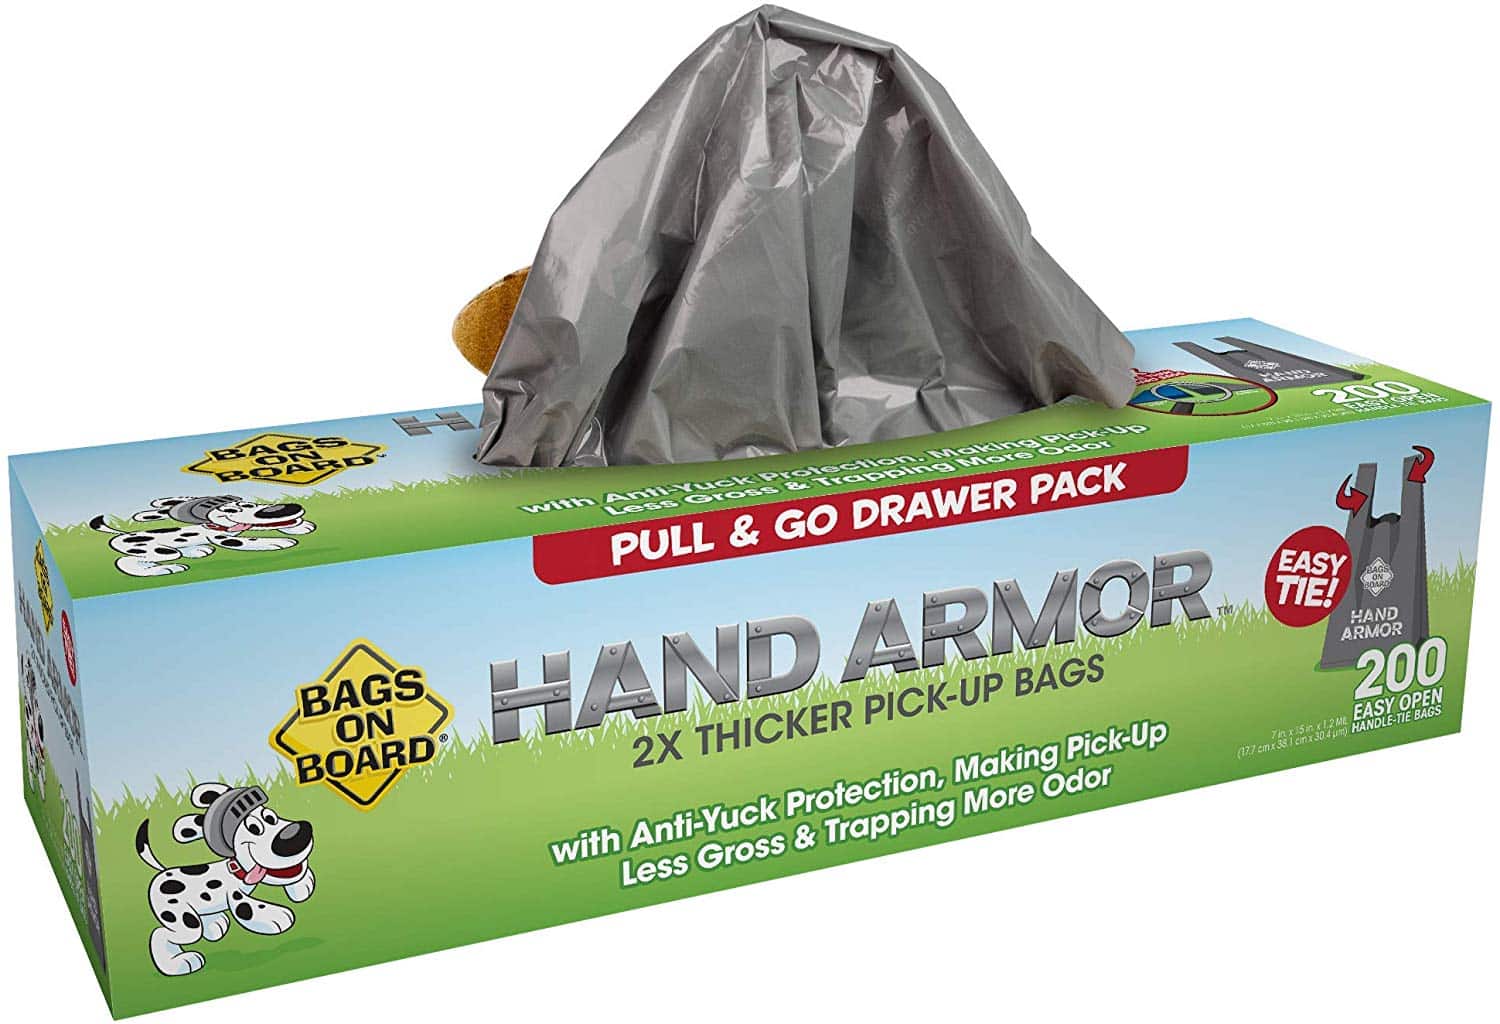 Bags On Board Hand Armor Dog Poop Bags | Extra Thick Dog Waste Bags $6.80 (REG $16.99)